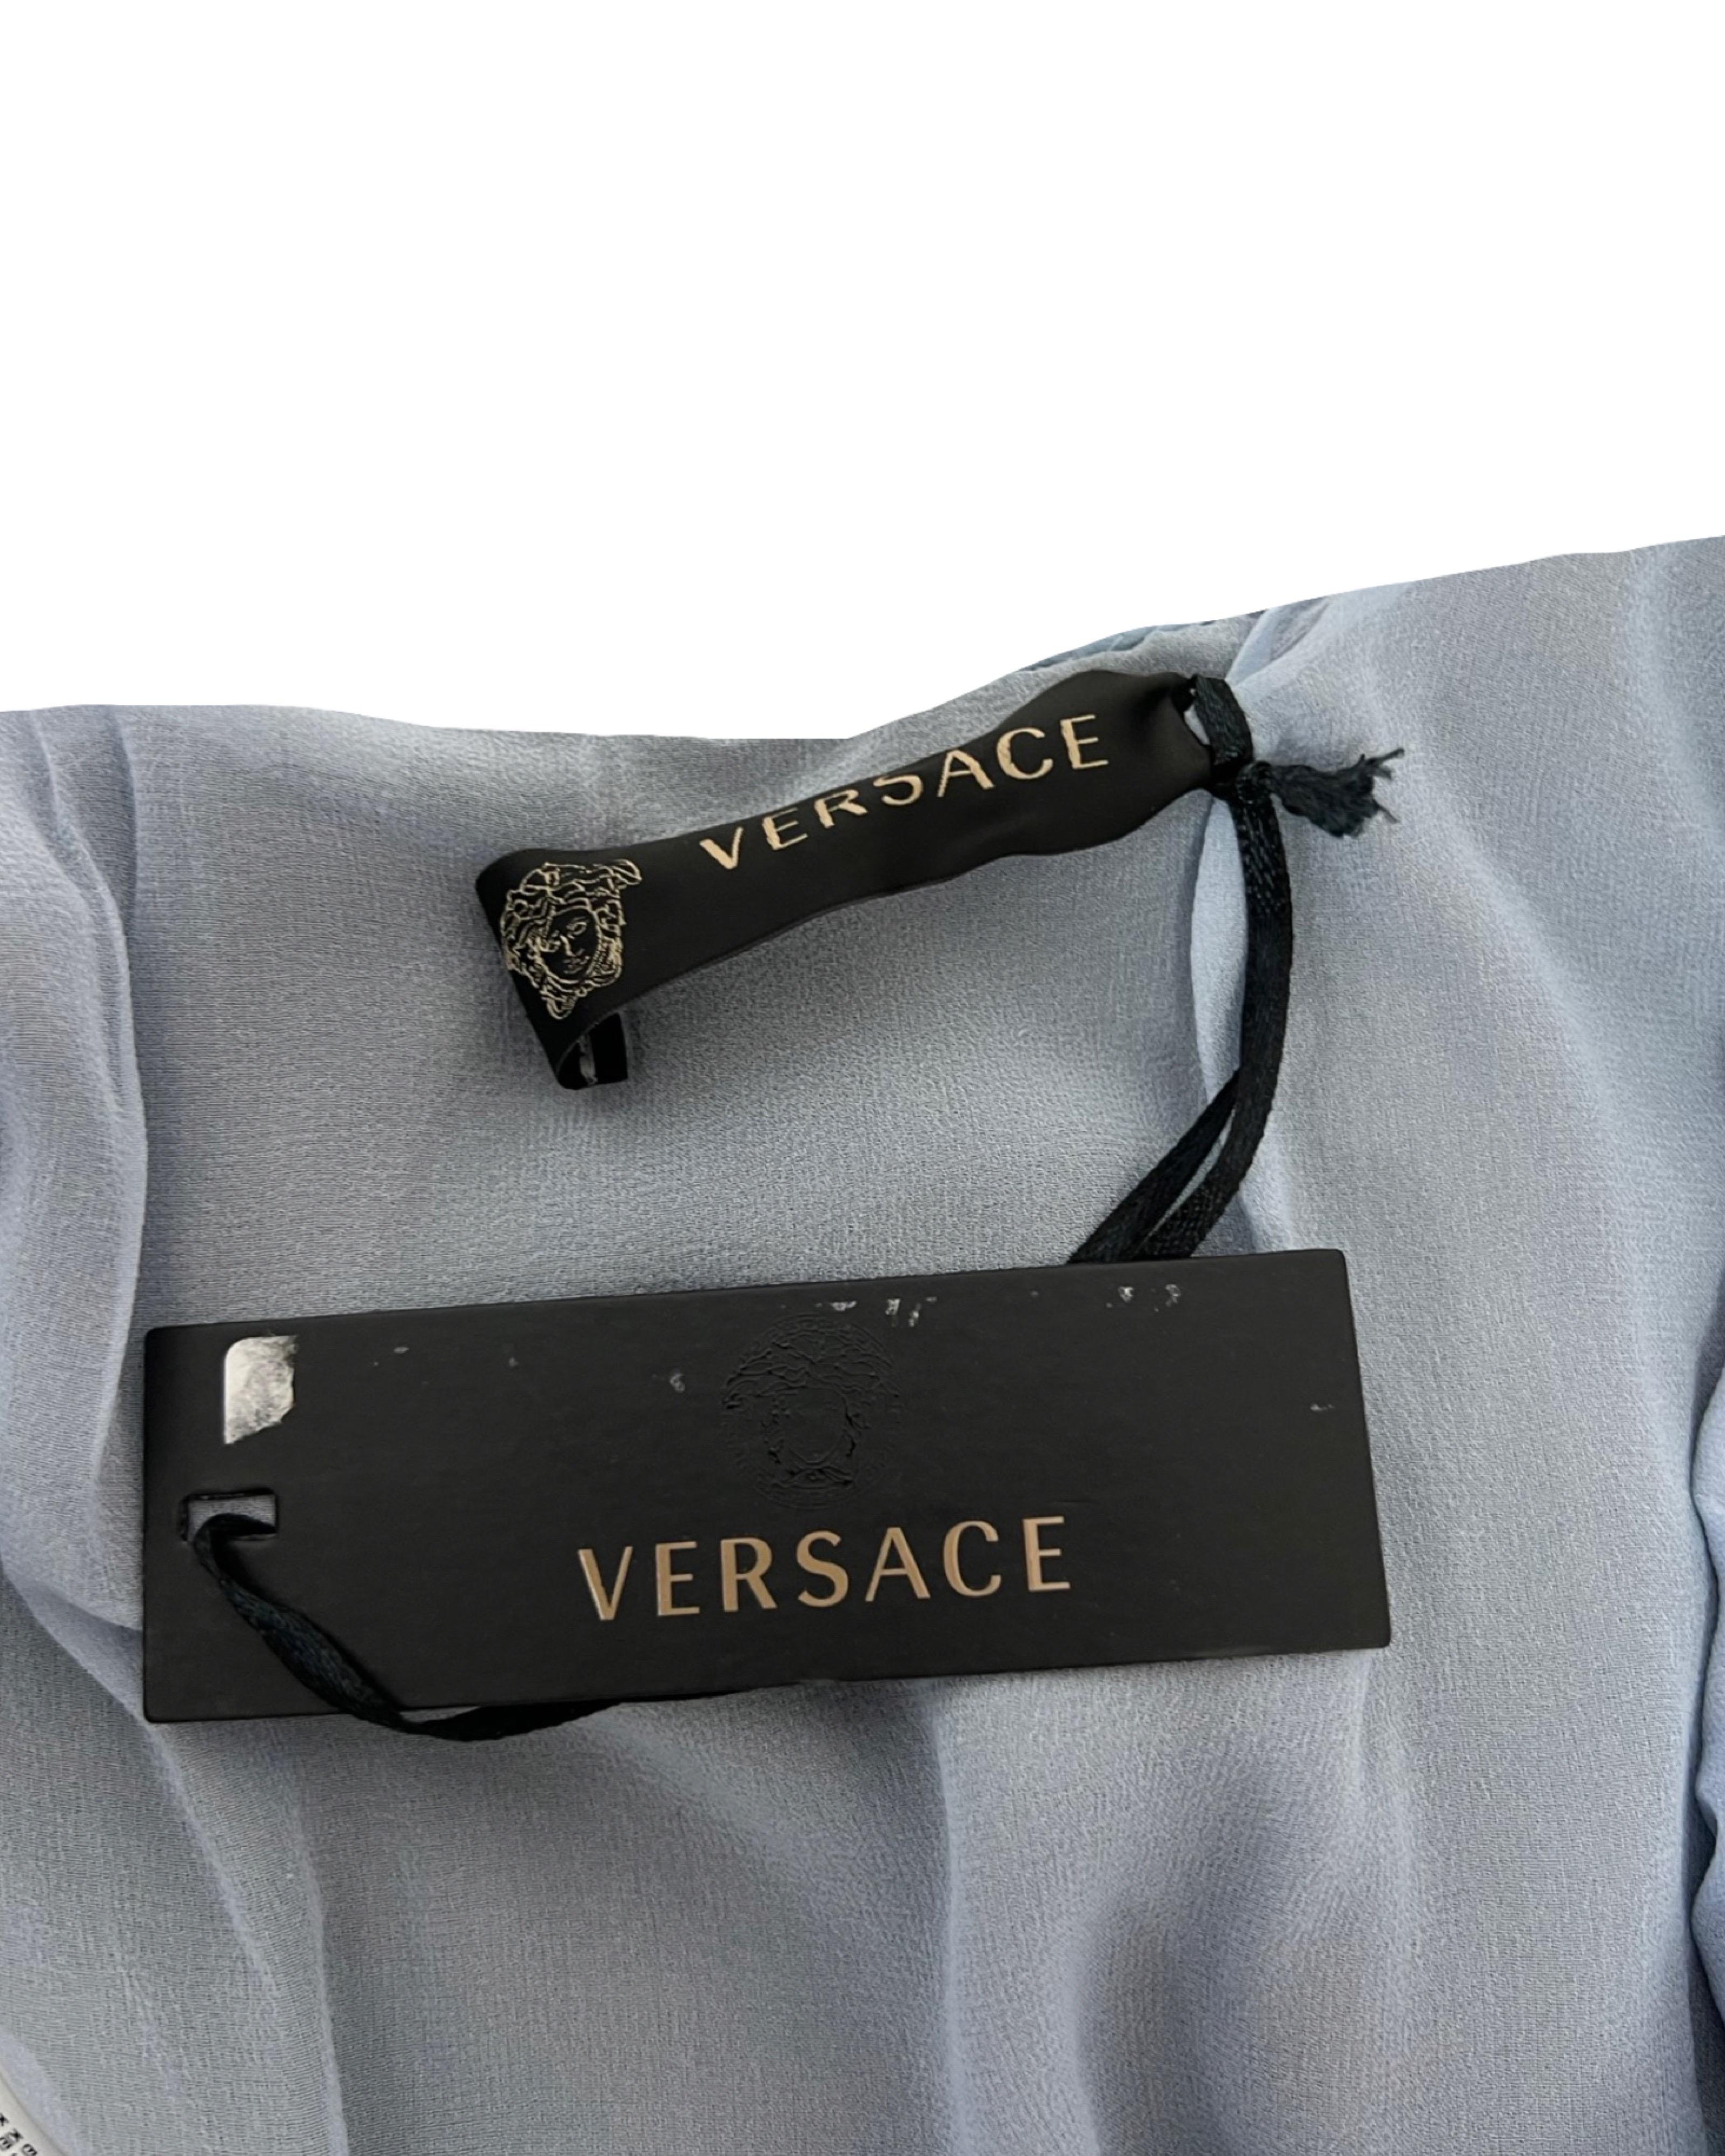 NWT SS 2017 Versace by Donatella Versace Embelisshed Mini Dress For Sale 2